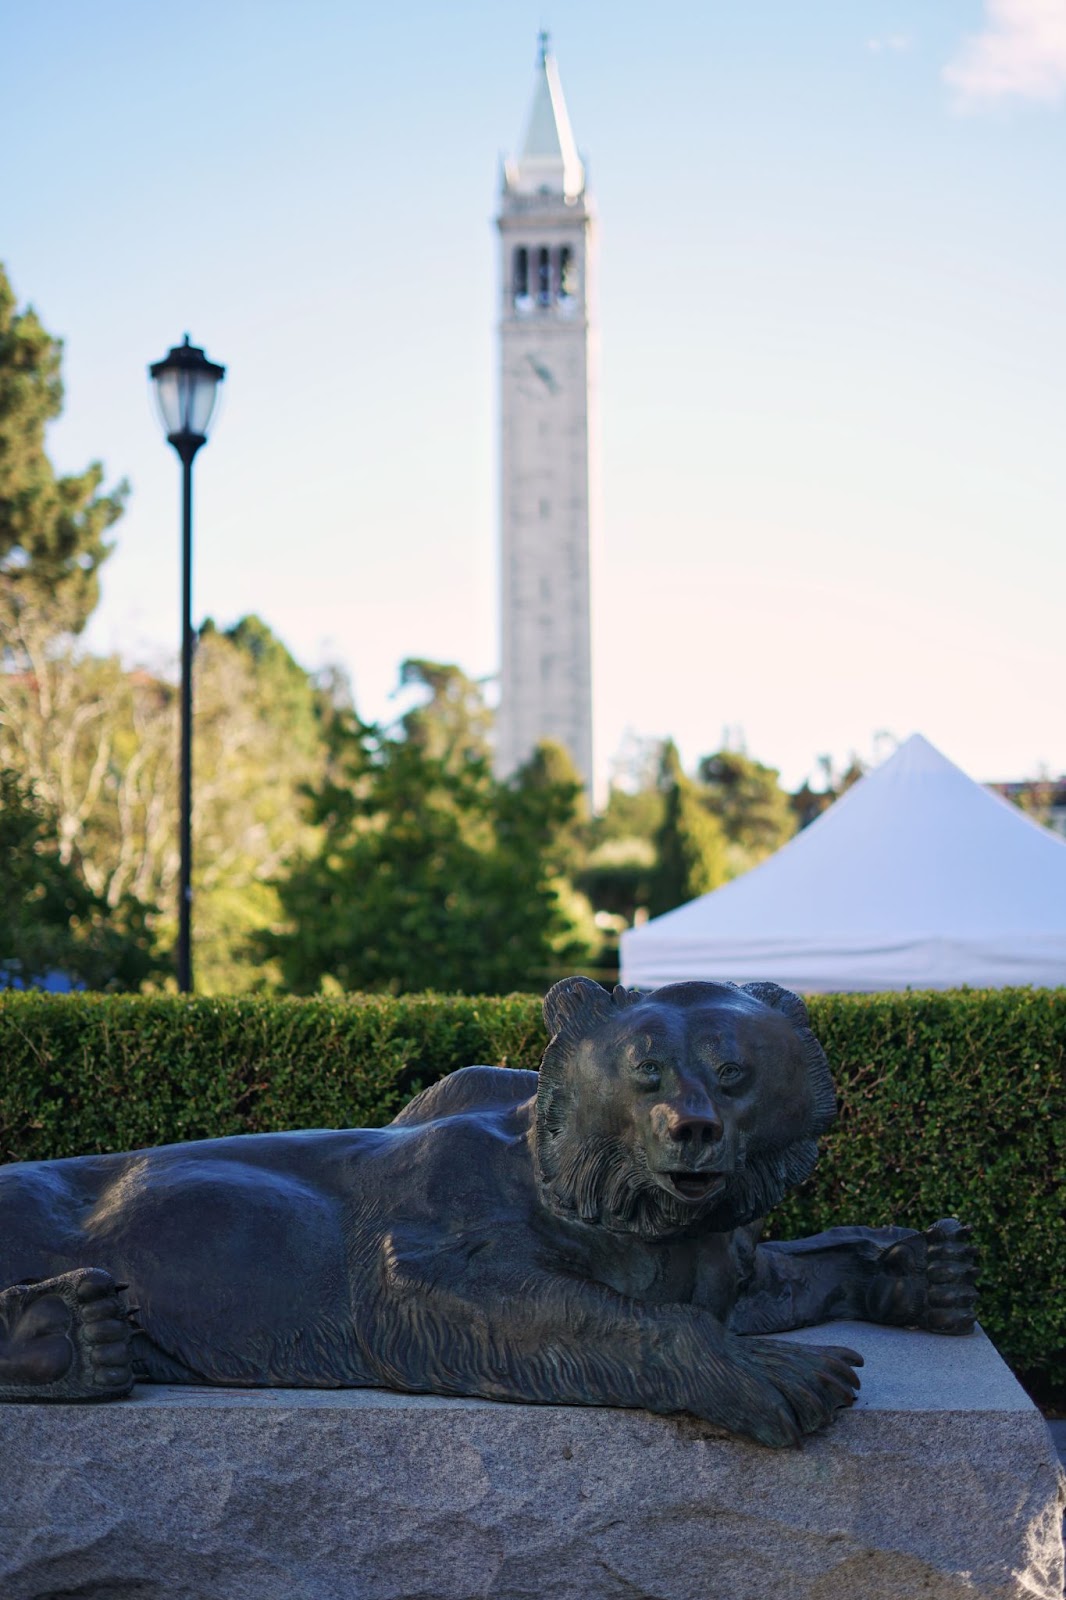 A bear statue, lying prone with the Sather Tower in the background.